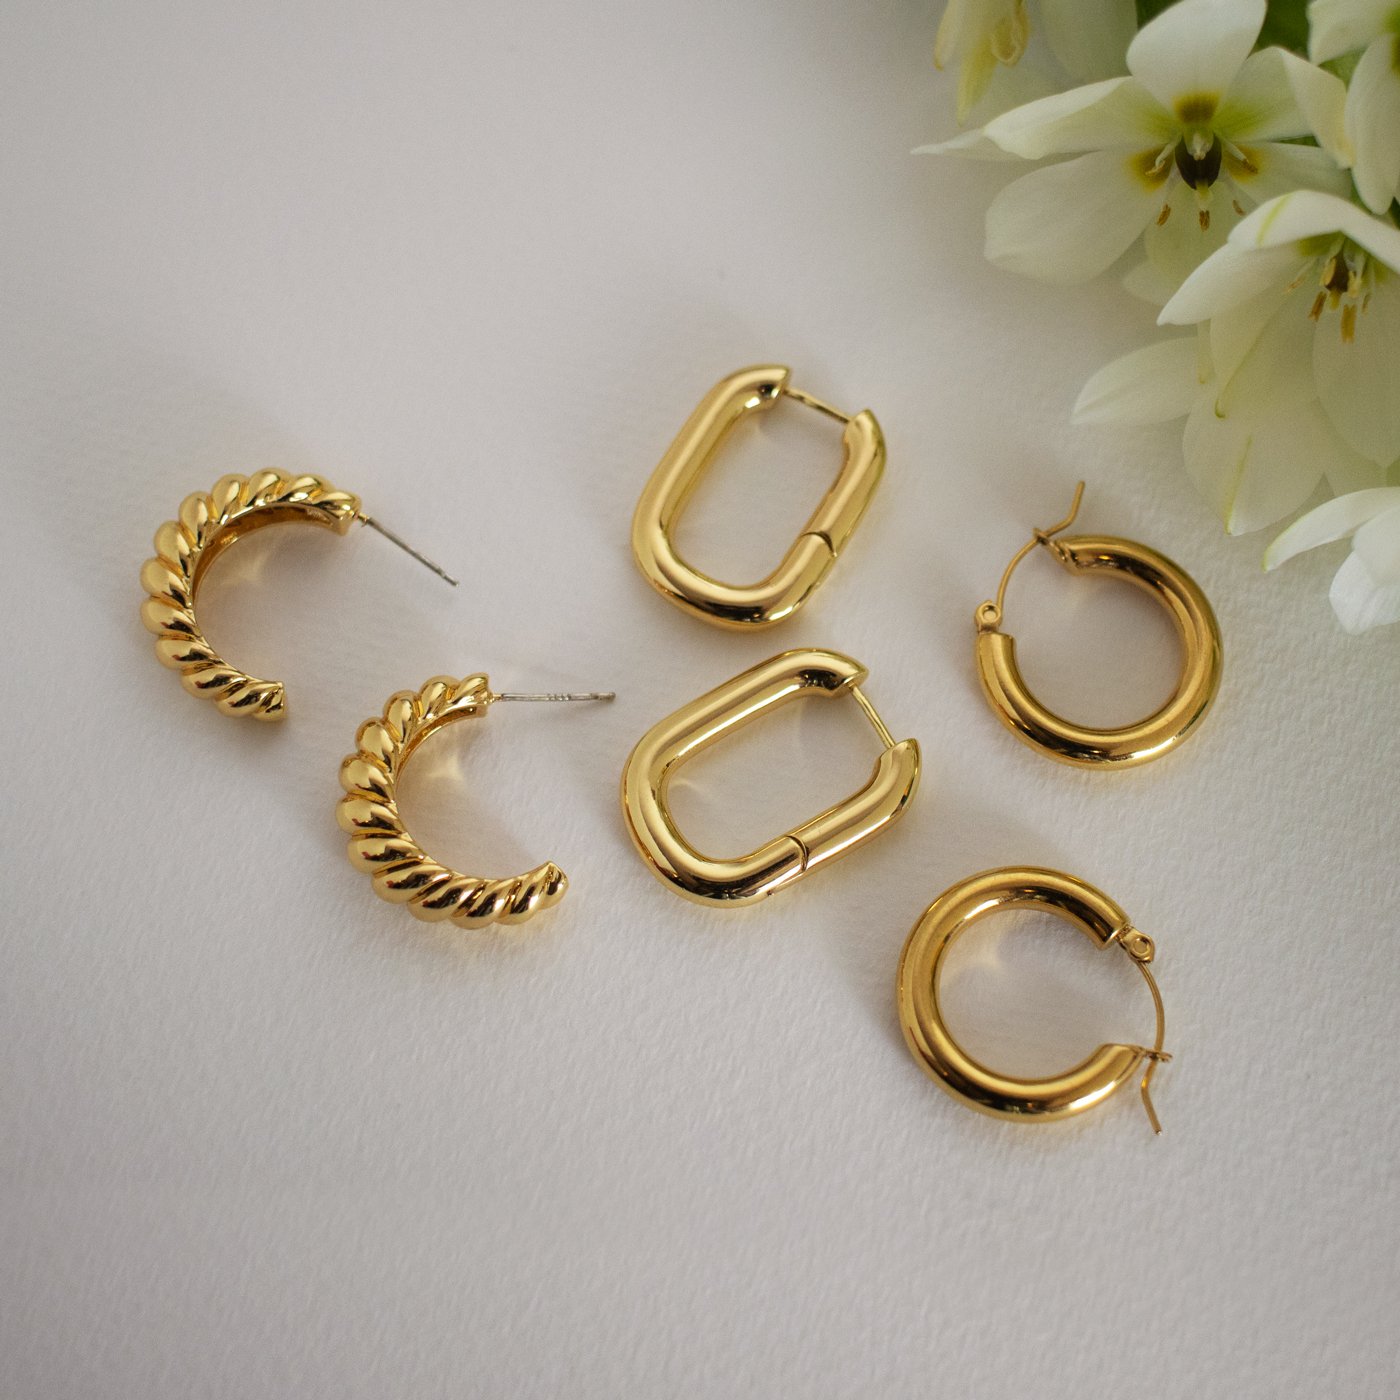 curate, siizu, sustainable and ethically made fashion jewelry, womens twisted gold hoop earrings, womens hoop earrings, gold hoop earrings, medium sized hoop earrings, fashion jewelry